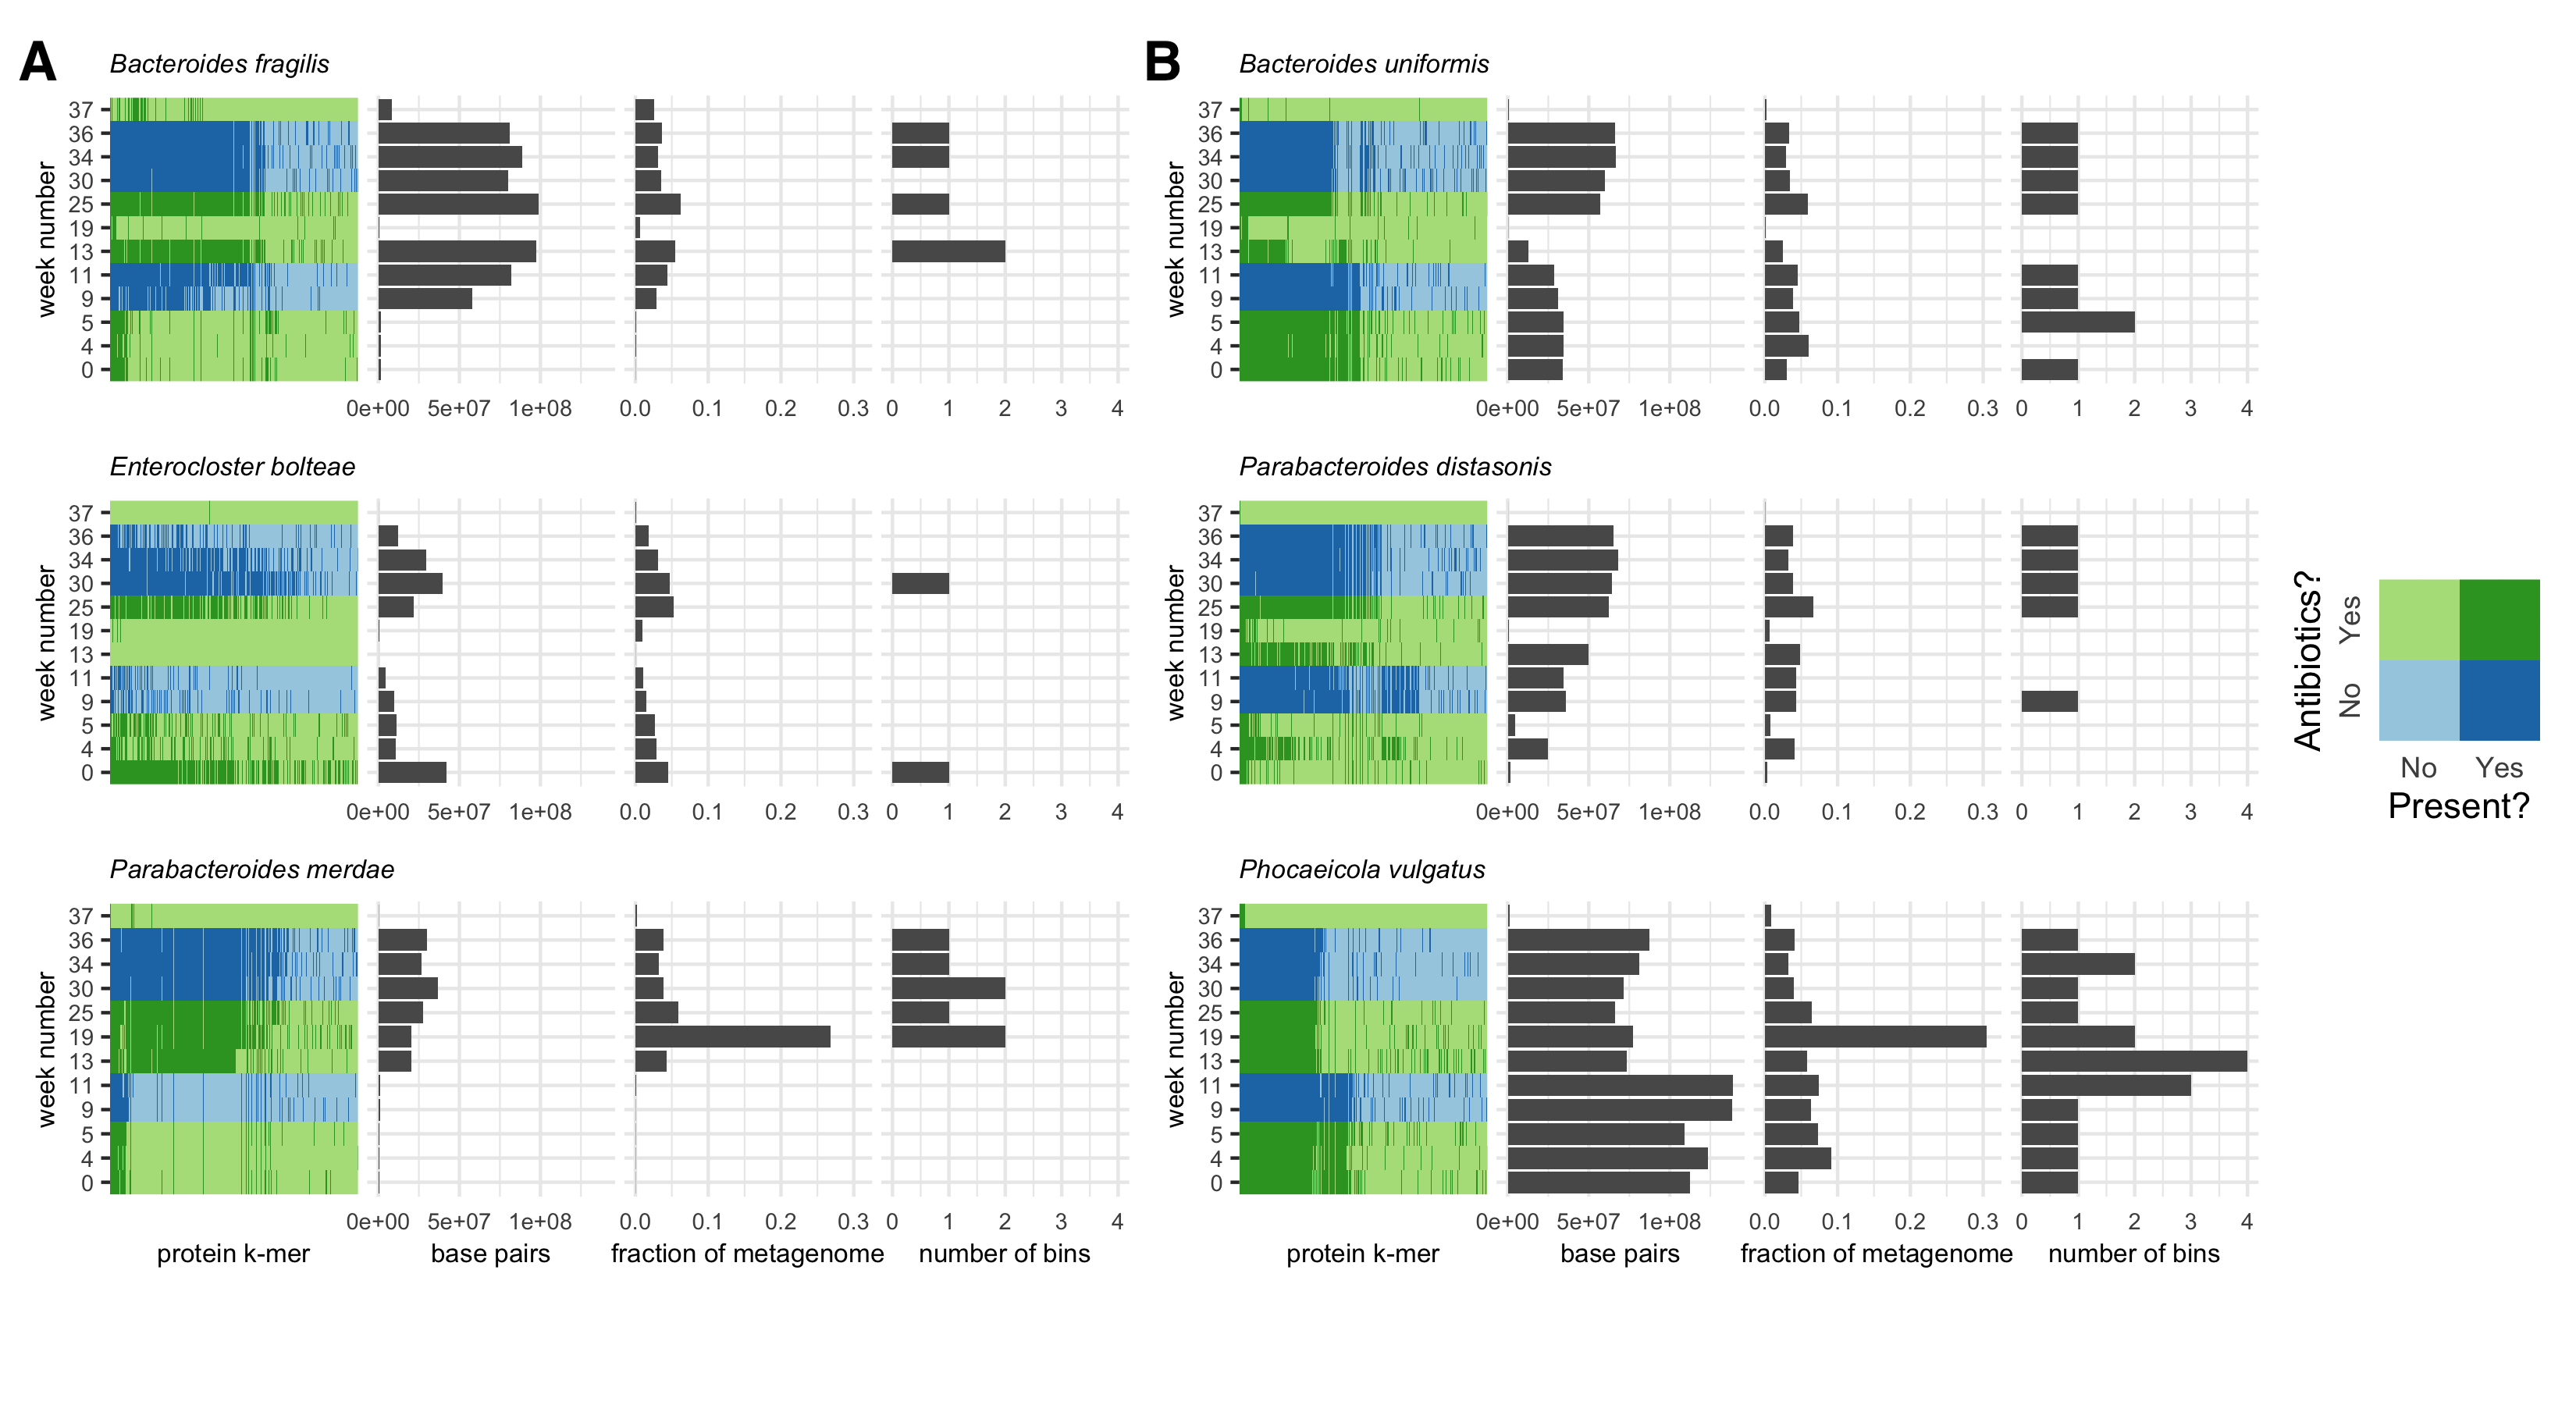 Figure S4: kaa-mer metapangenomes for six species. Each species contains a four-panel figure. The first panel is a binmap plot. Dark colors represent k-mers that are present in each sample. Blue shades represent time points when the sampled individual was not on antibiotics, while green shades represent time points when the individual was on antibiotics. The second panel represents an estimated number of base pairs in the metagenome detected to originate from that species. The third panel represents an estimated fraction of the metagenome assigned to that species. The fourth panel represents the number of bins produced for that species from that sample using a de novo metagenome assembly and binning approach. The two values represented in the second and third panels and the species assignations used to infer the value represented in the fourth panel were inferred using the sourmash gather algorithm against the GTDB rs202 database. A) Species for which presence-absence fluctuated over the time series. B) Species for which strain presence-absence fluctuated over the time series.